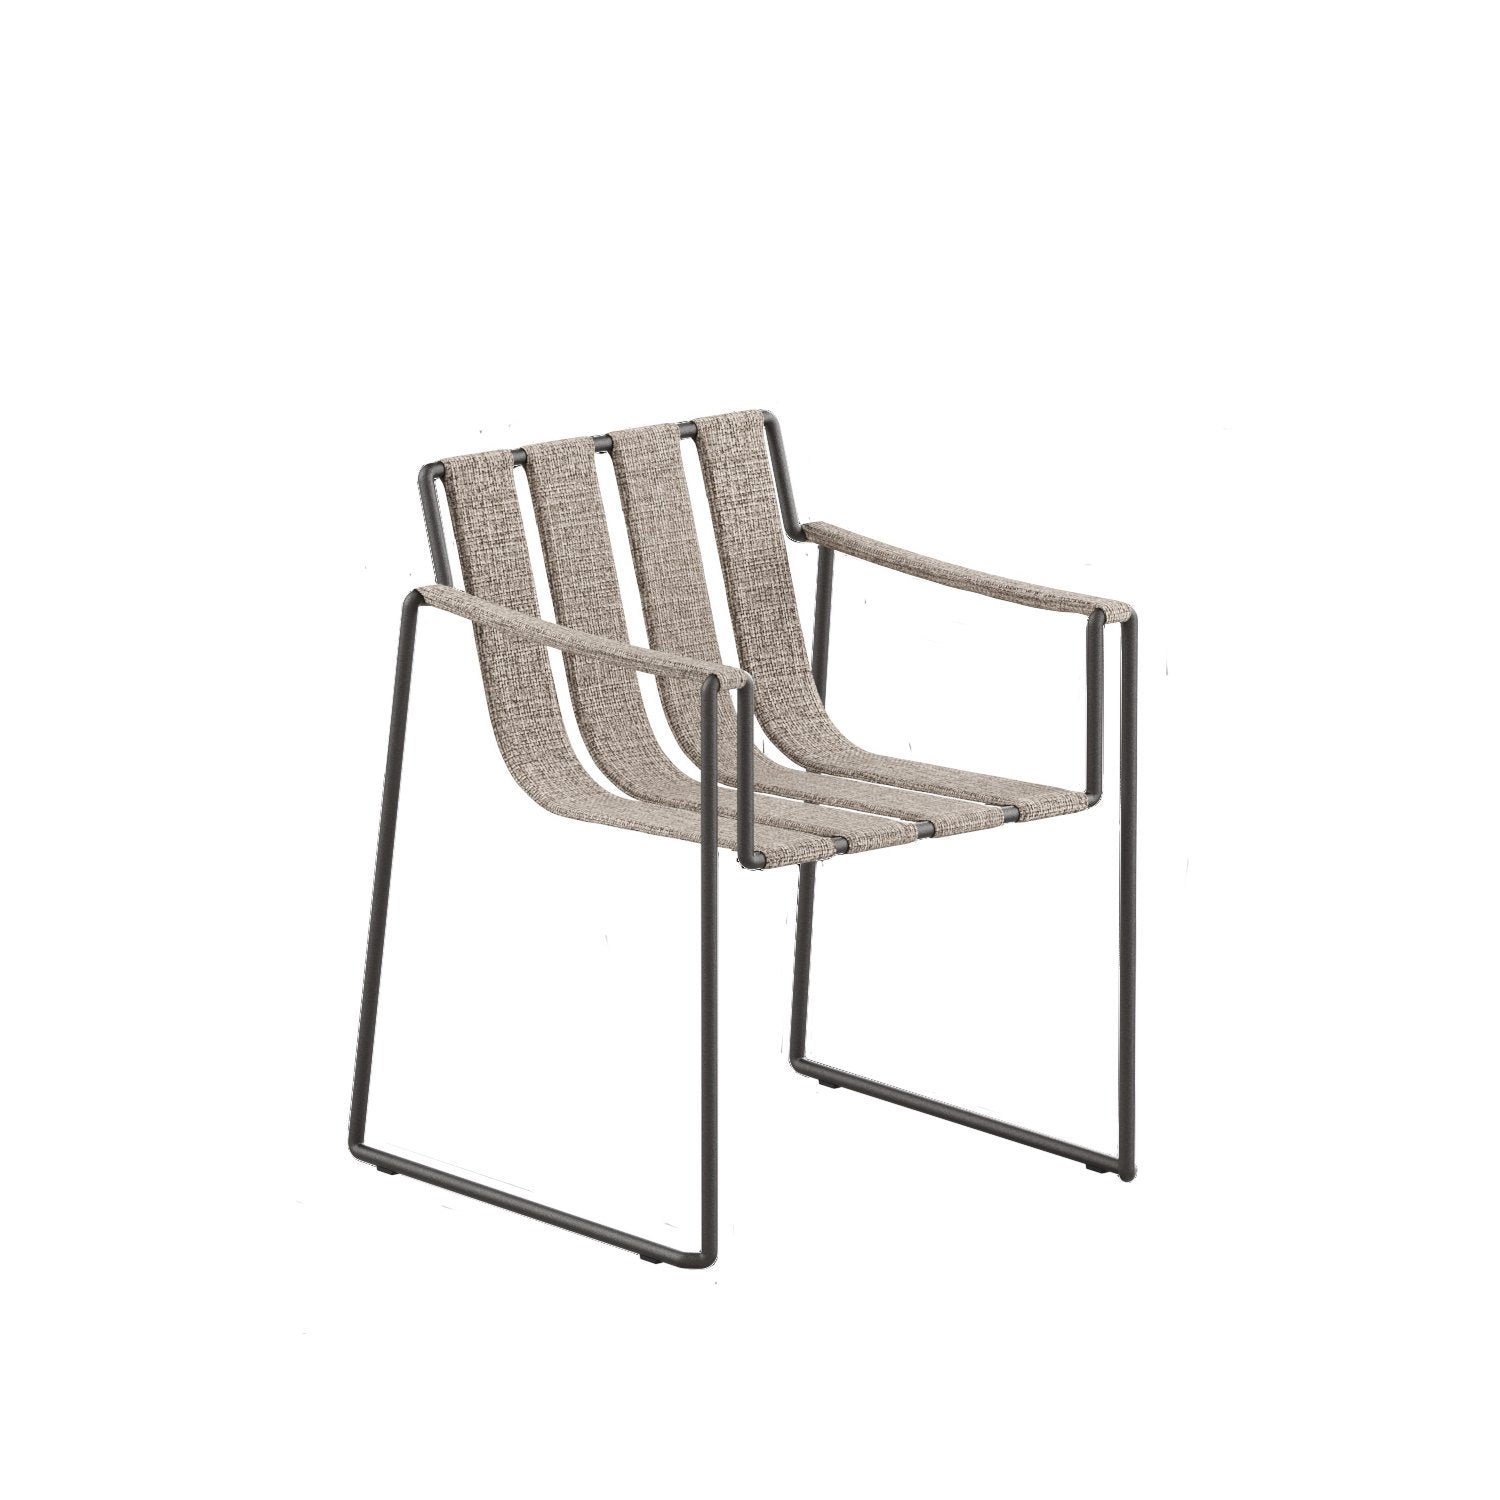 Strappy 55 chair for outdoors